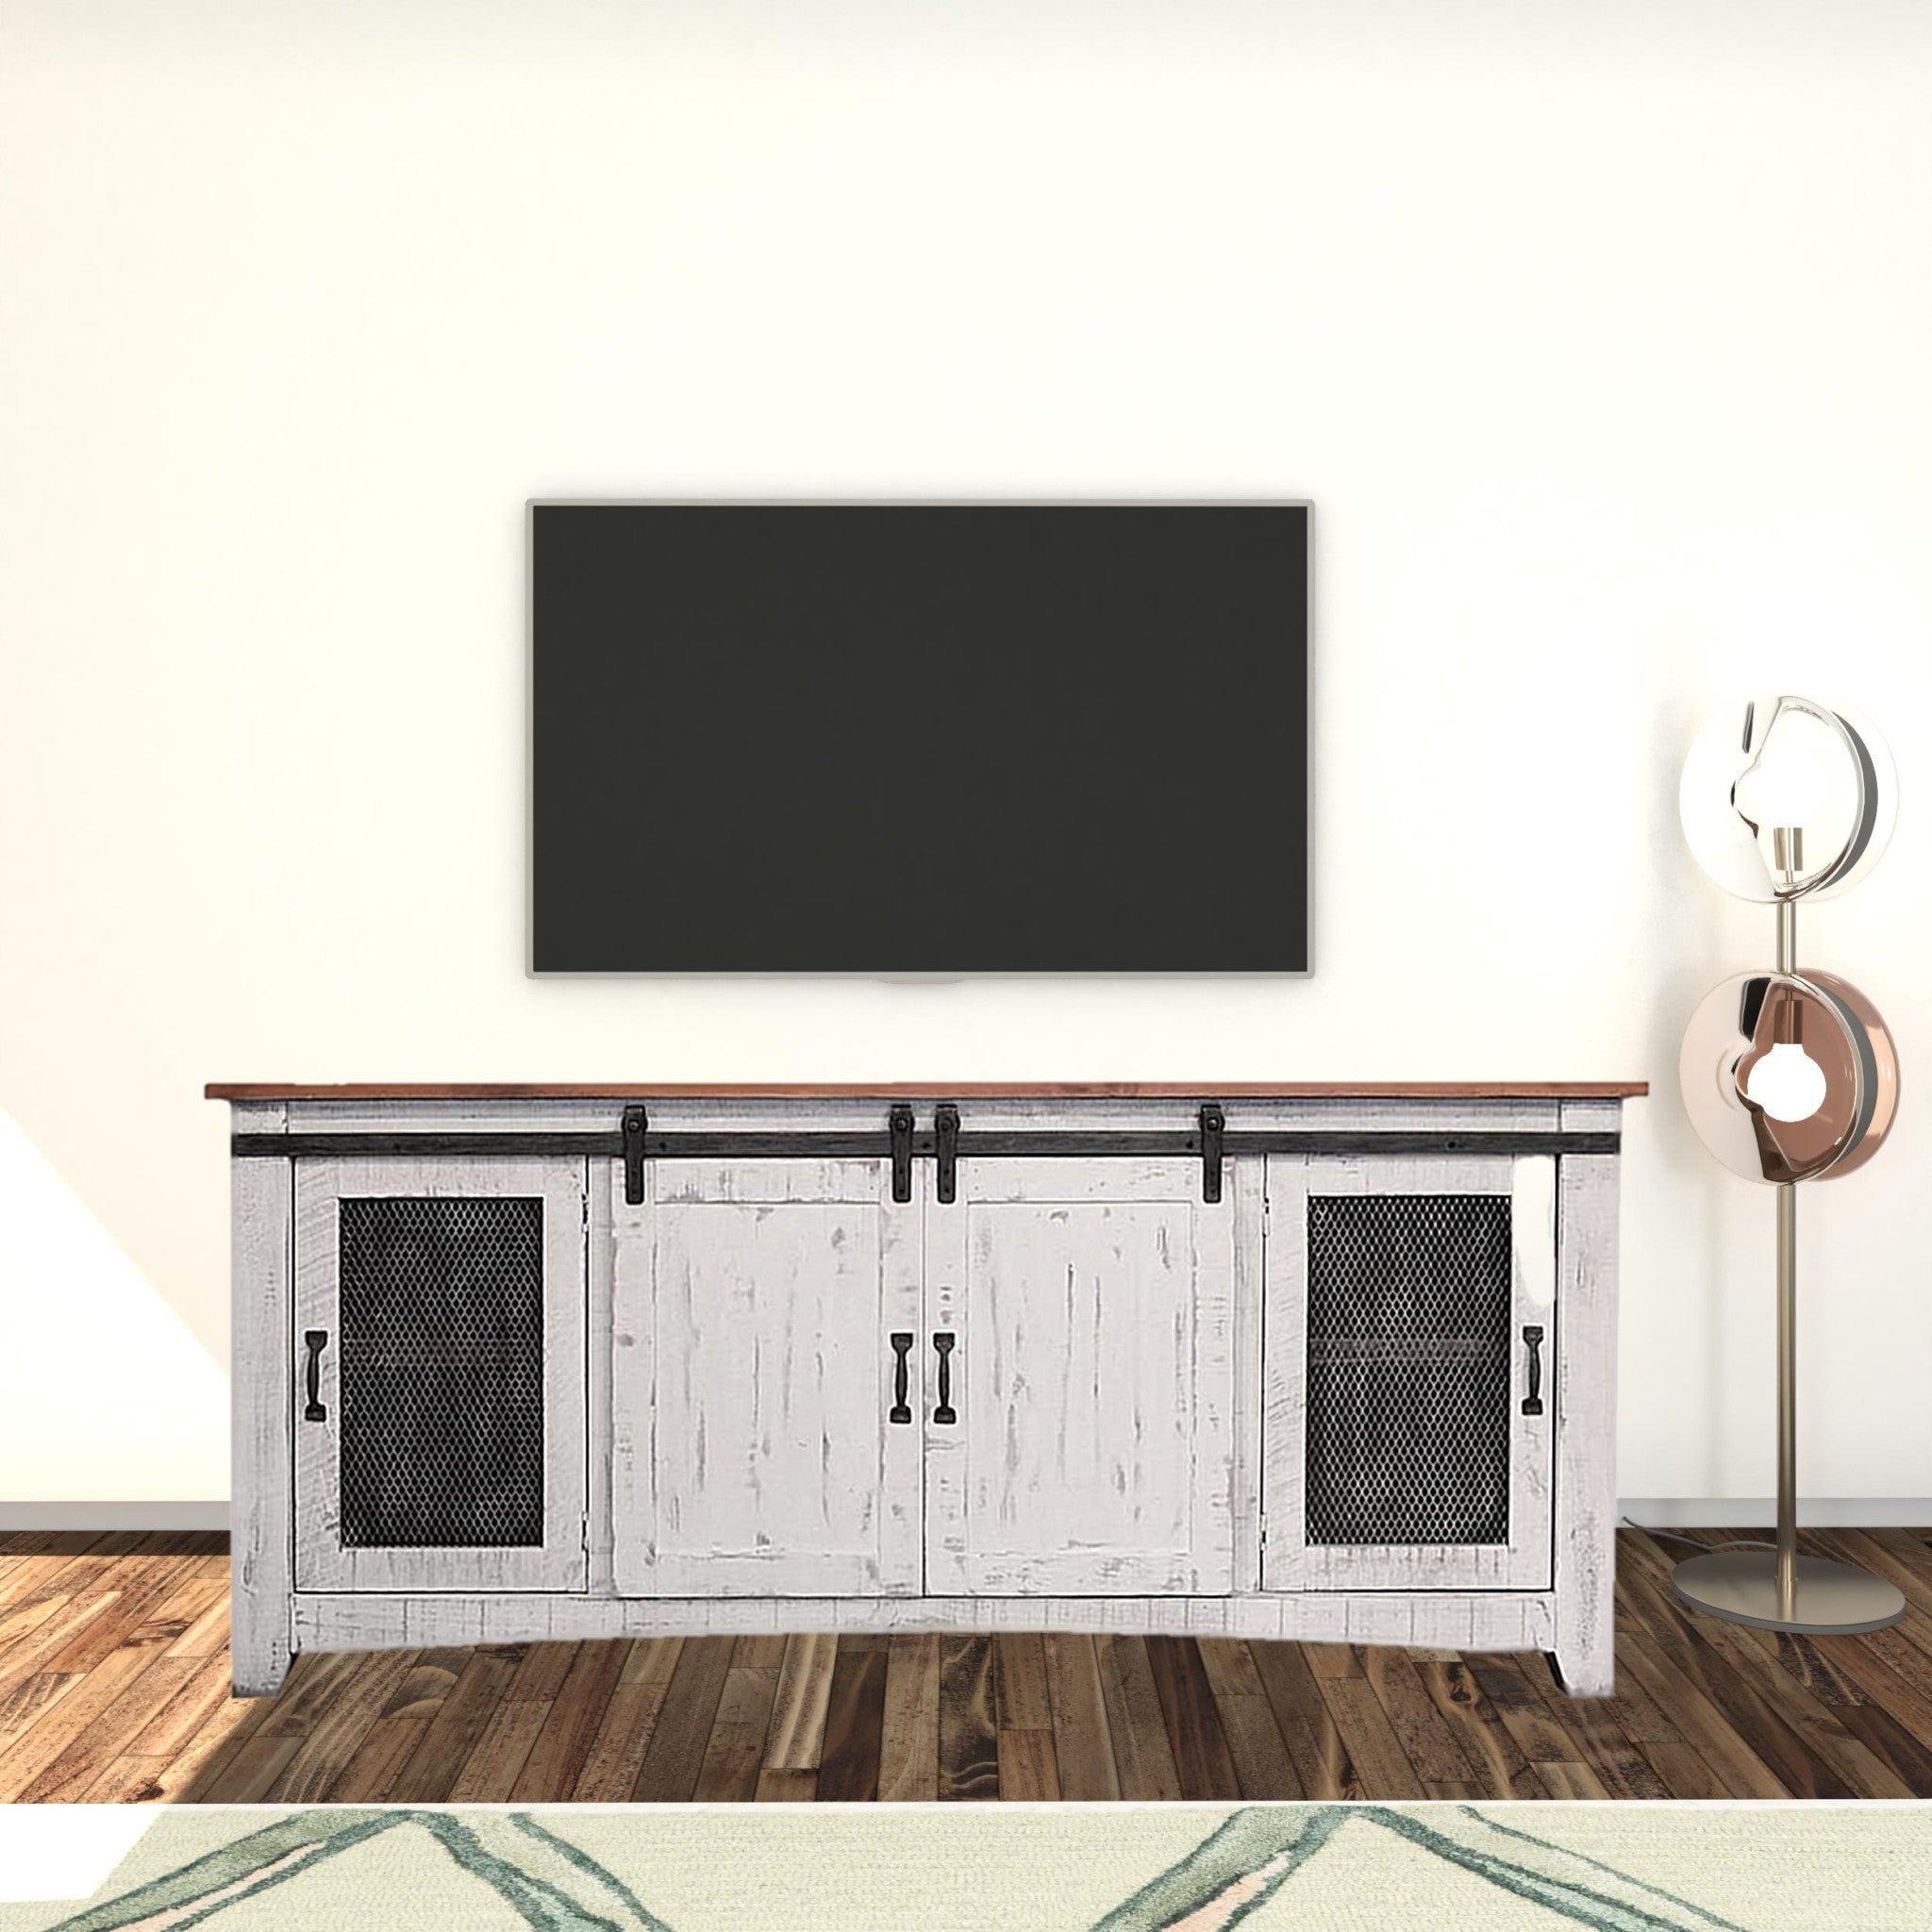 79" White Solid Wood Cabinet Enclosed Storage Distressed TV Stand